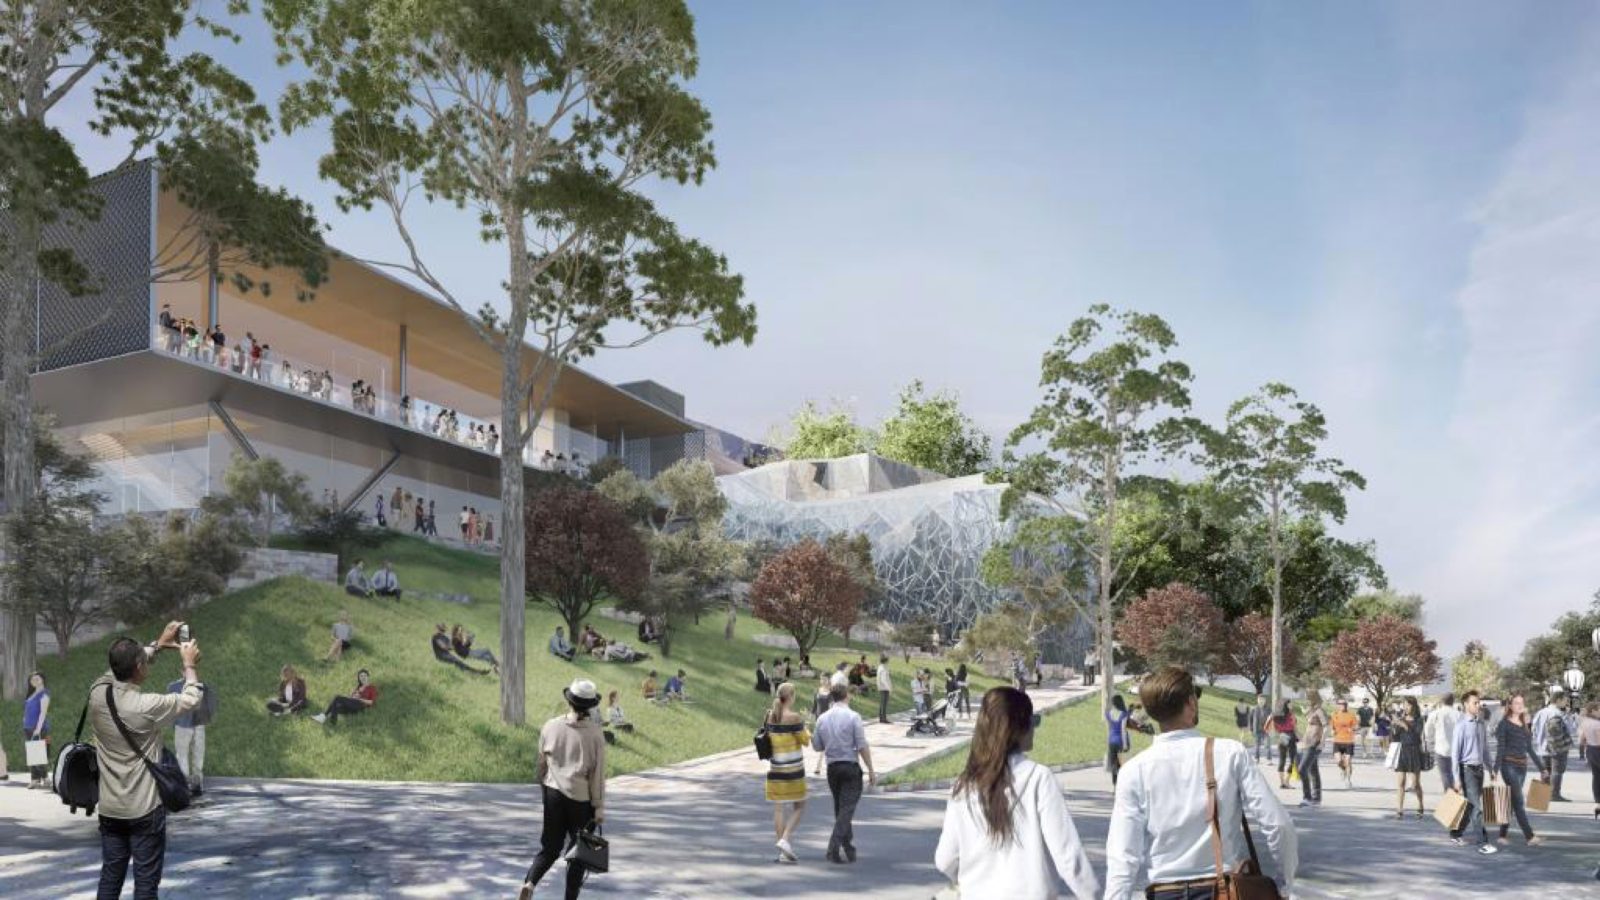 photo of Apple submits revised plans for controversial Federation Square store image